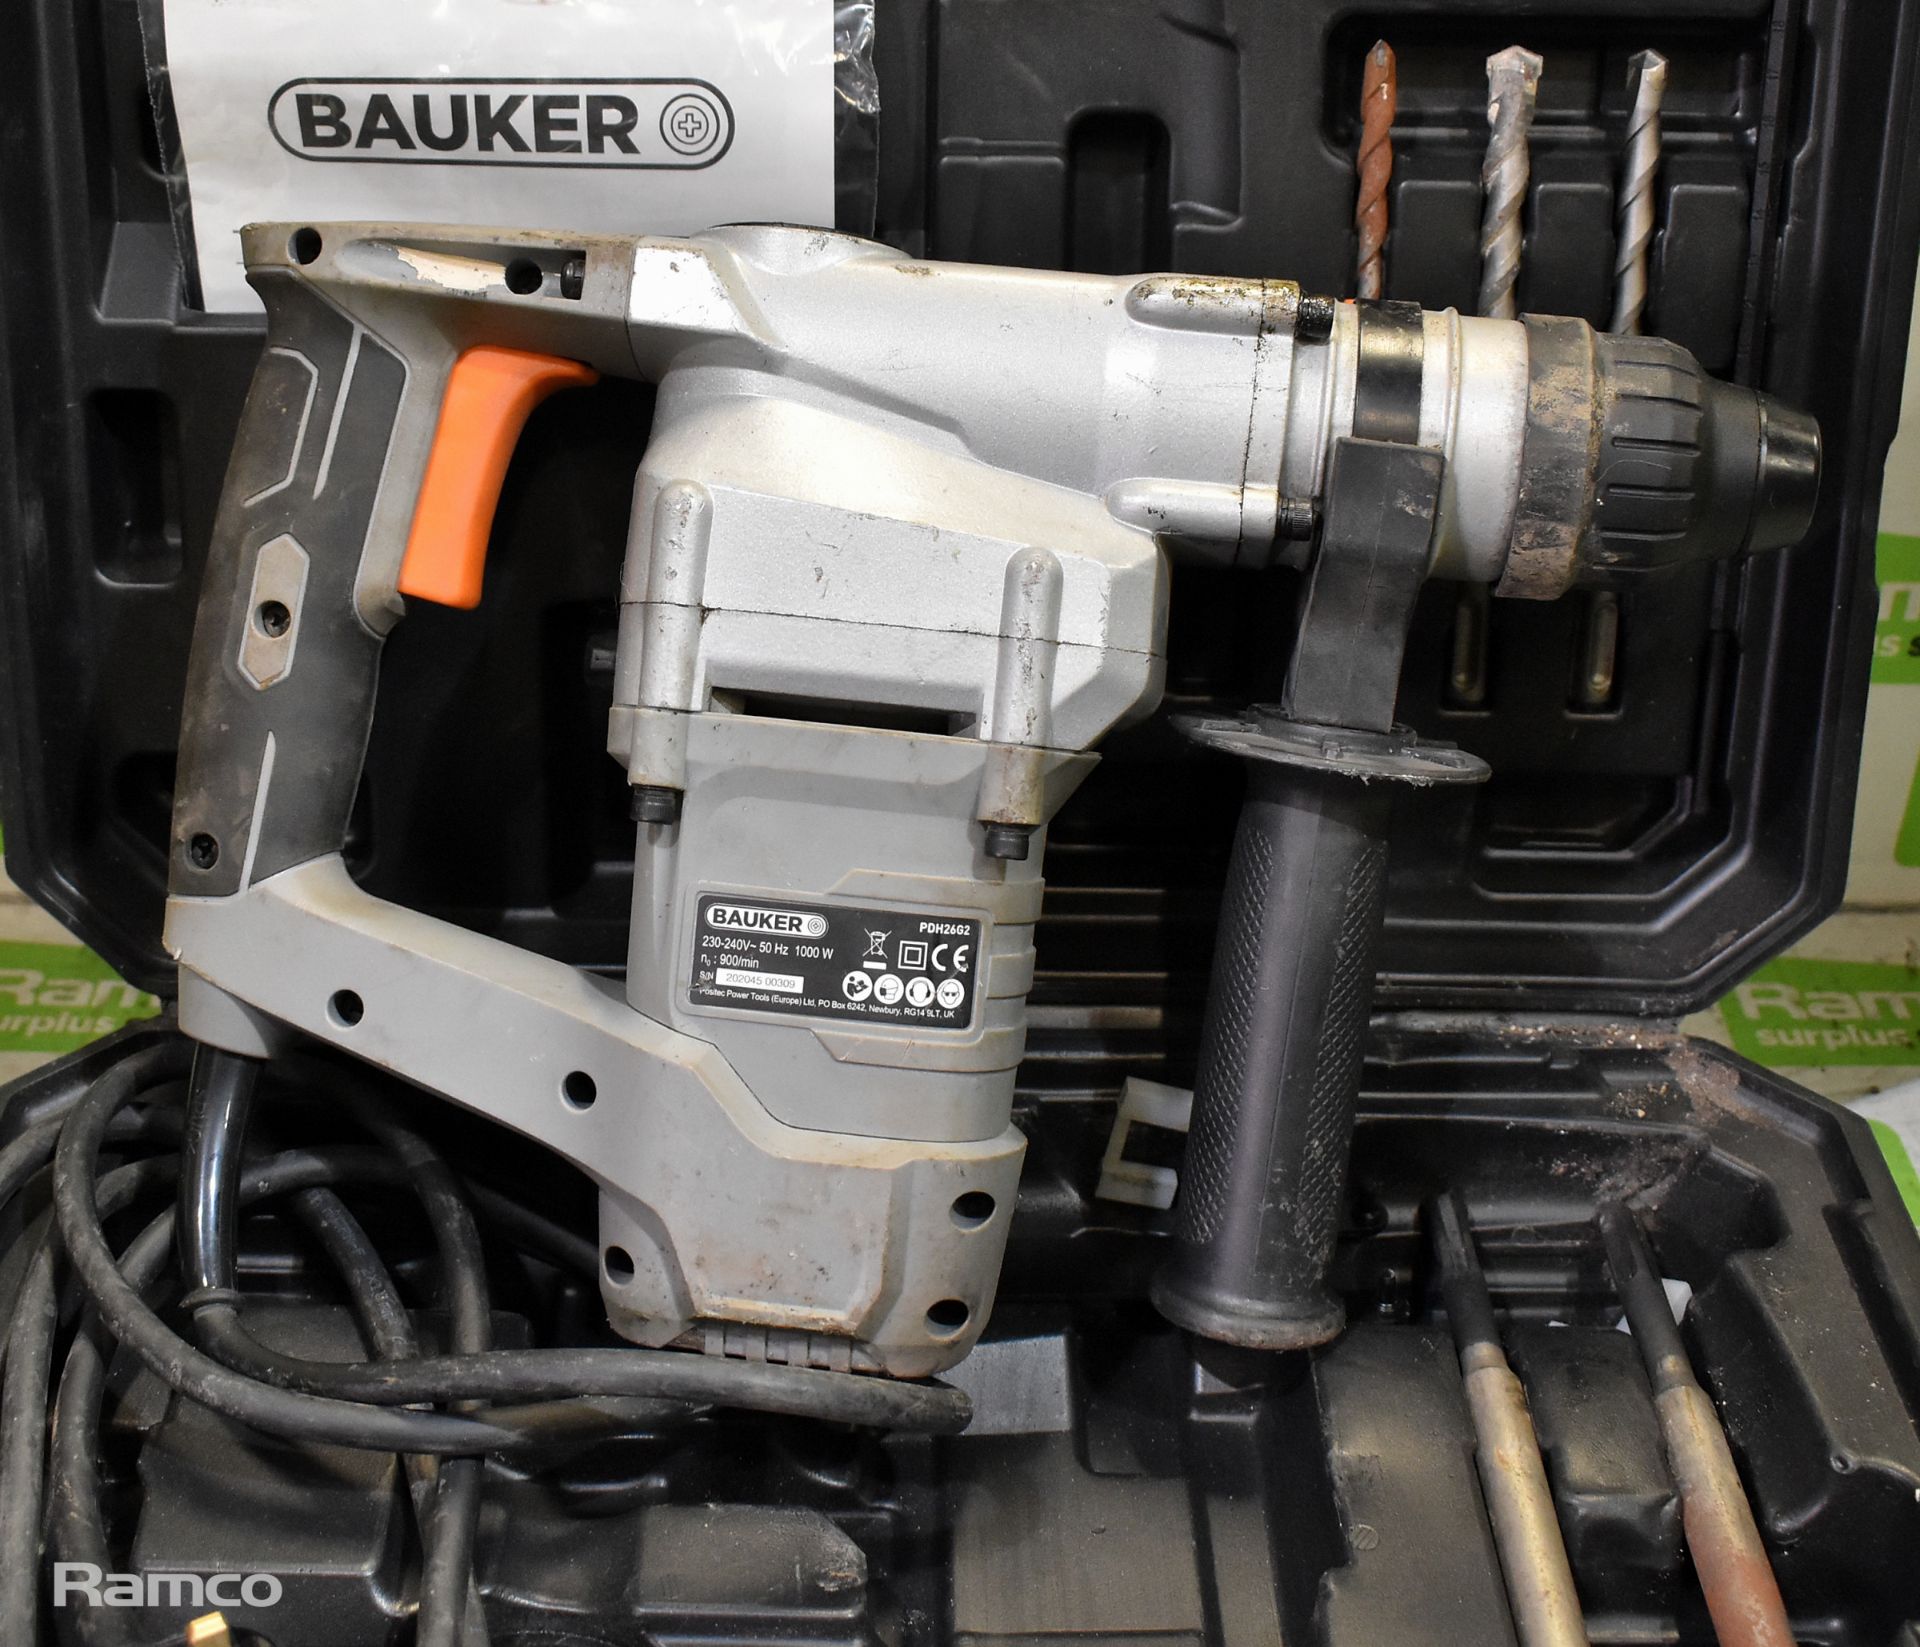 2x Bauker 1000 W hammer drills with case - Image 7 of 10